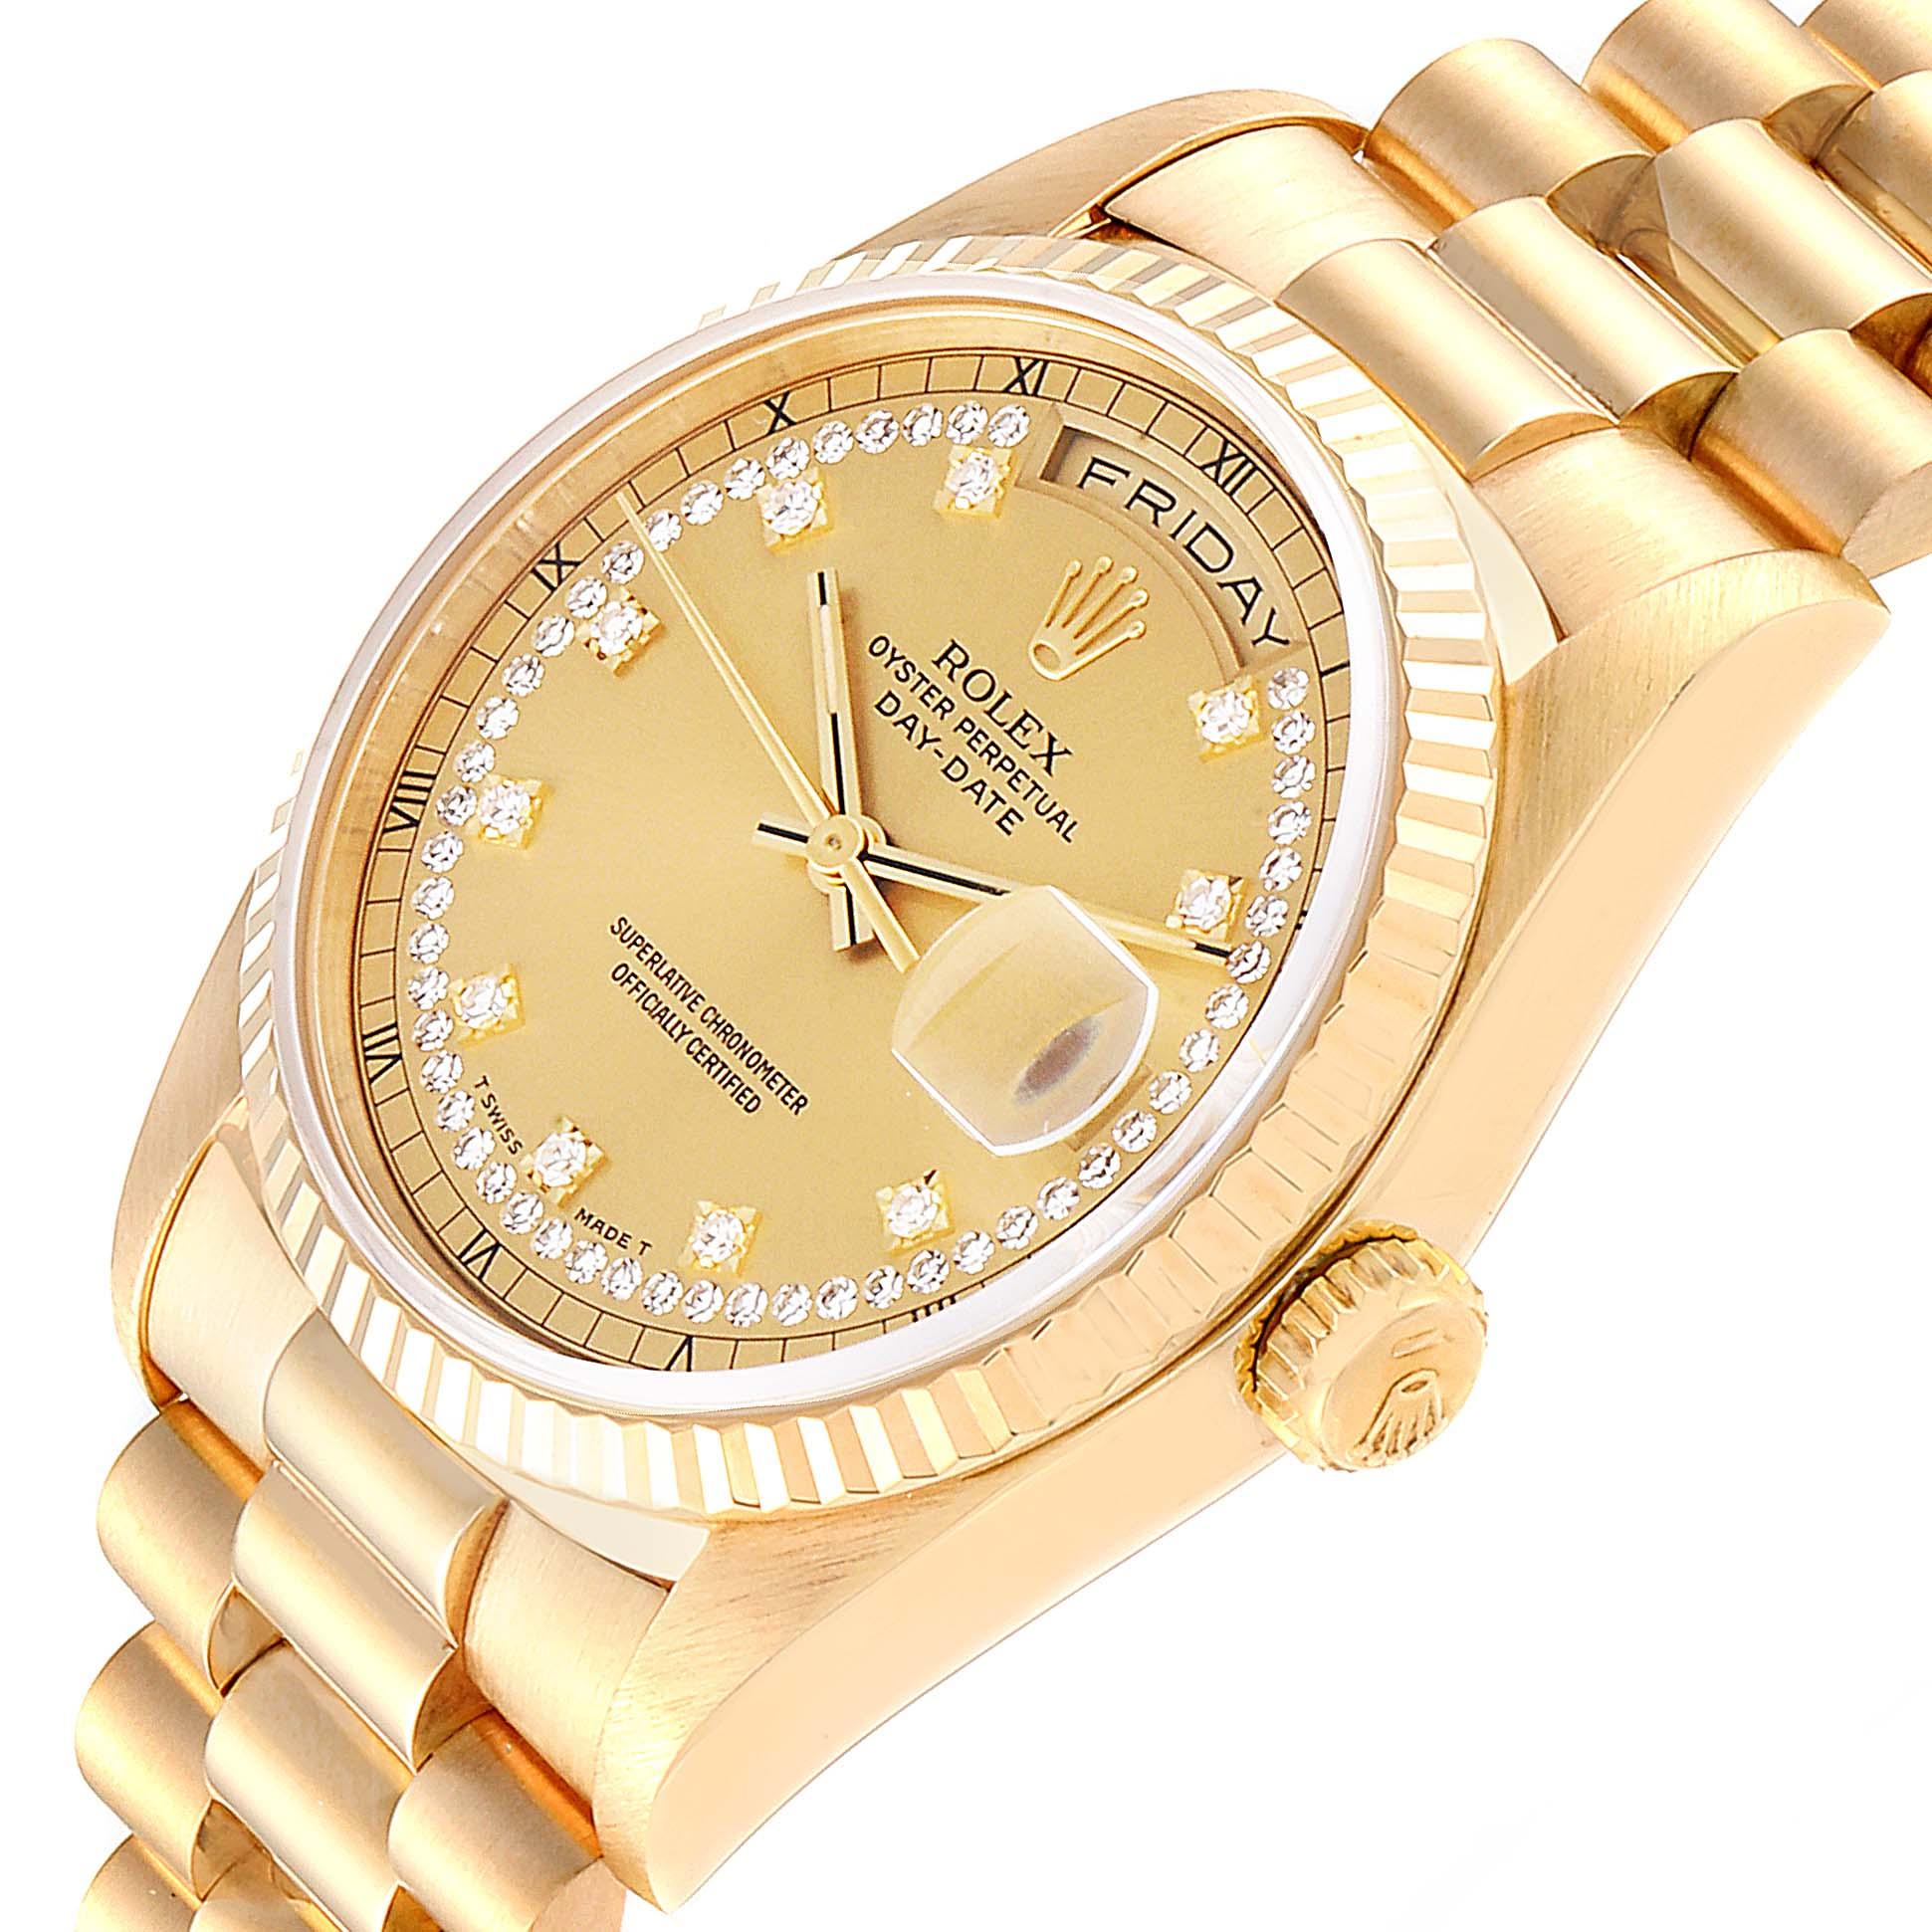 Rolex President Day-Date Yellow Gold String Diamond Dial Men's Watch 18238 For Sale 2